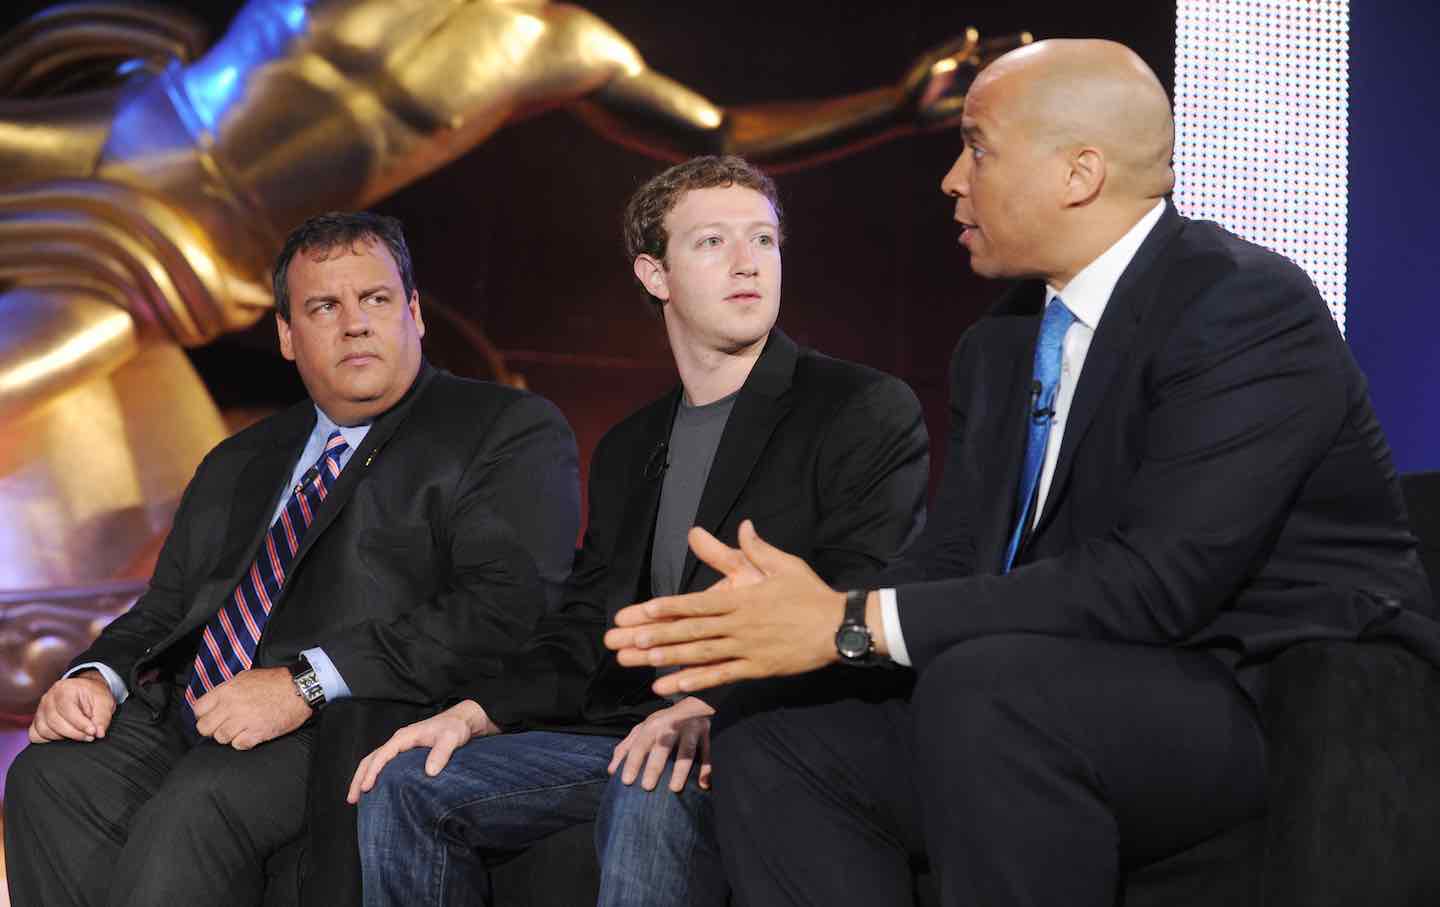 New Jersey Governor Chris Christie, Facebook CEO Mark Zuckerberg, and Newark Mayor Cory Booker at an educational summit at Rockefeller Plaza, 2010.